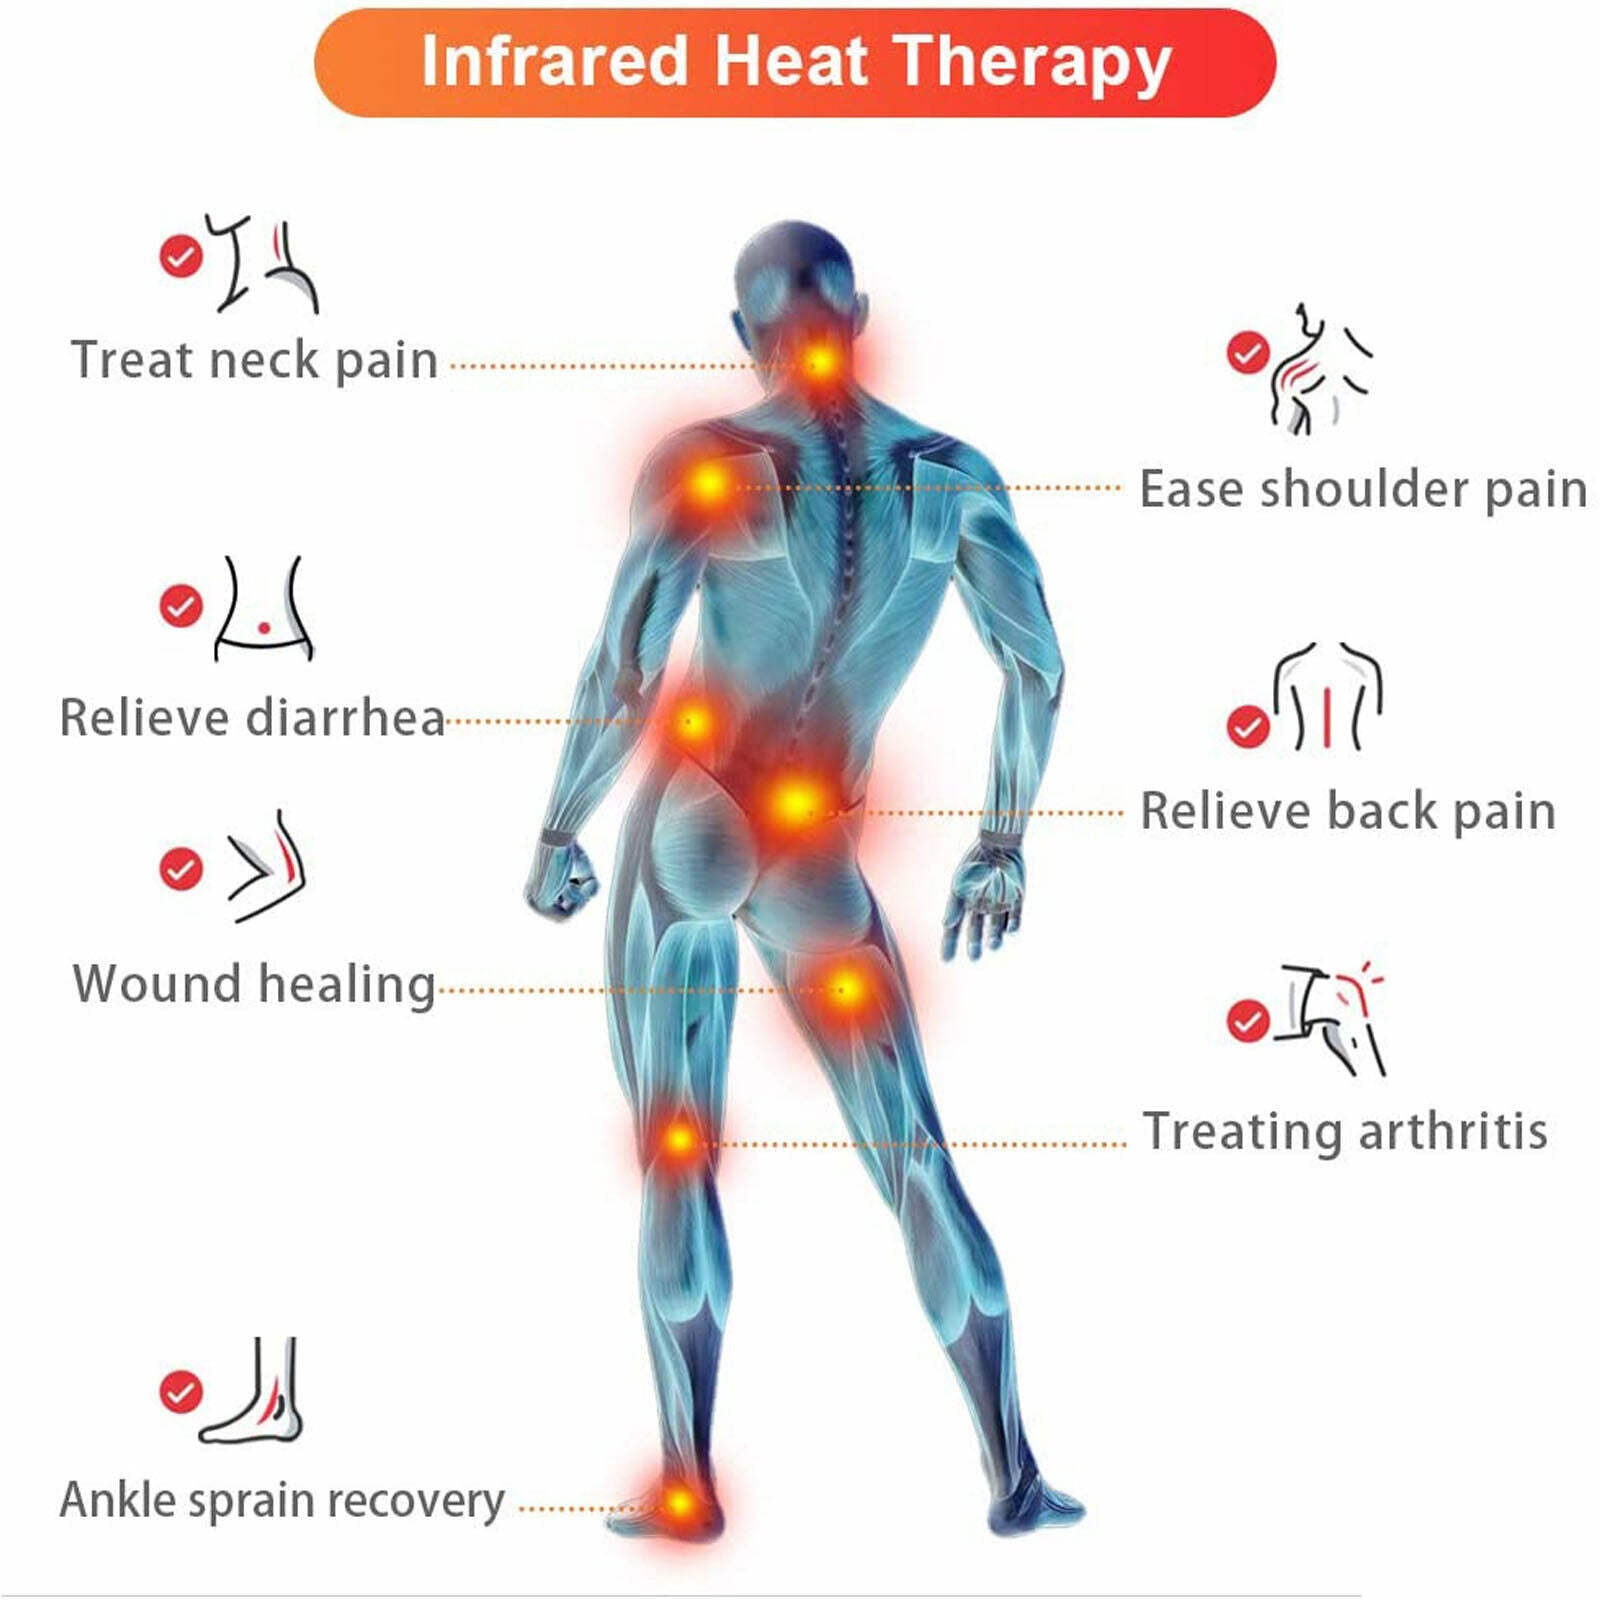 Infrared Light, 275W Infrared Heat Lamp,Therapy Heating Lamp for Relieve Joinpt Pain and Muscle Aches